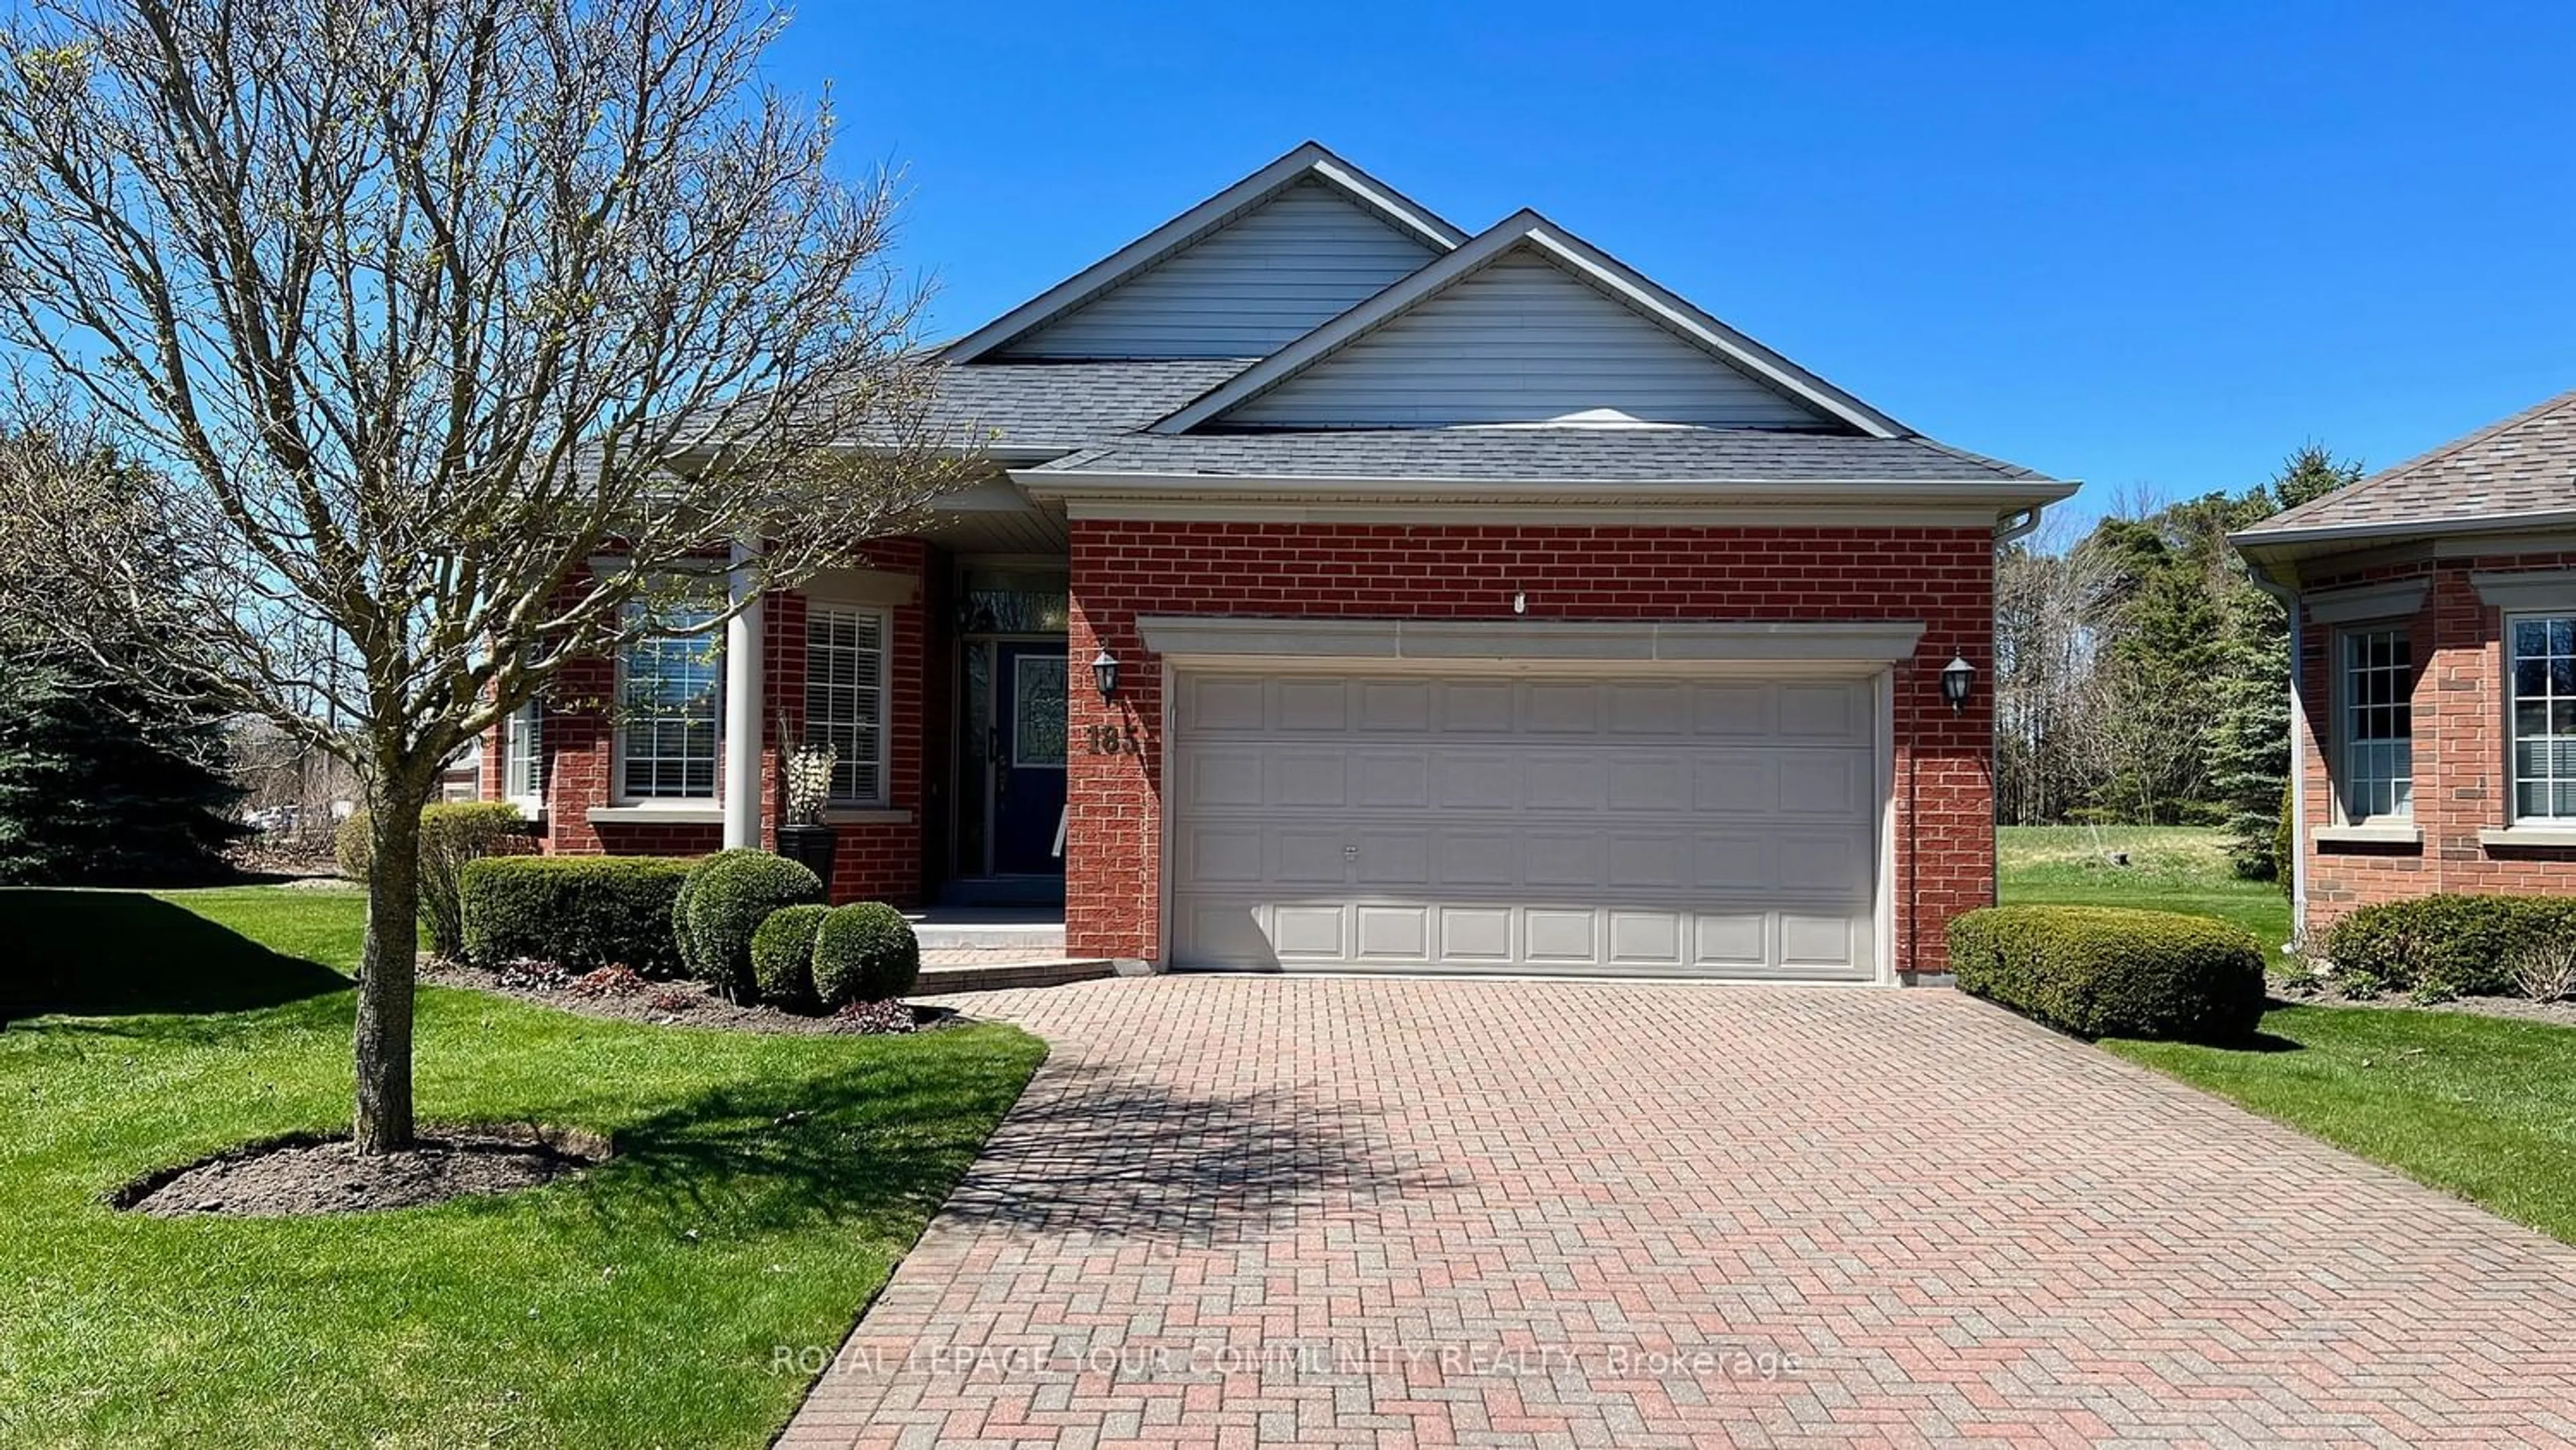 Home with brick exterior material for 185 Legendary Tr, Whitchurch-Stouffville Ontario L4A 1N5